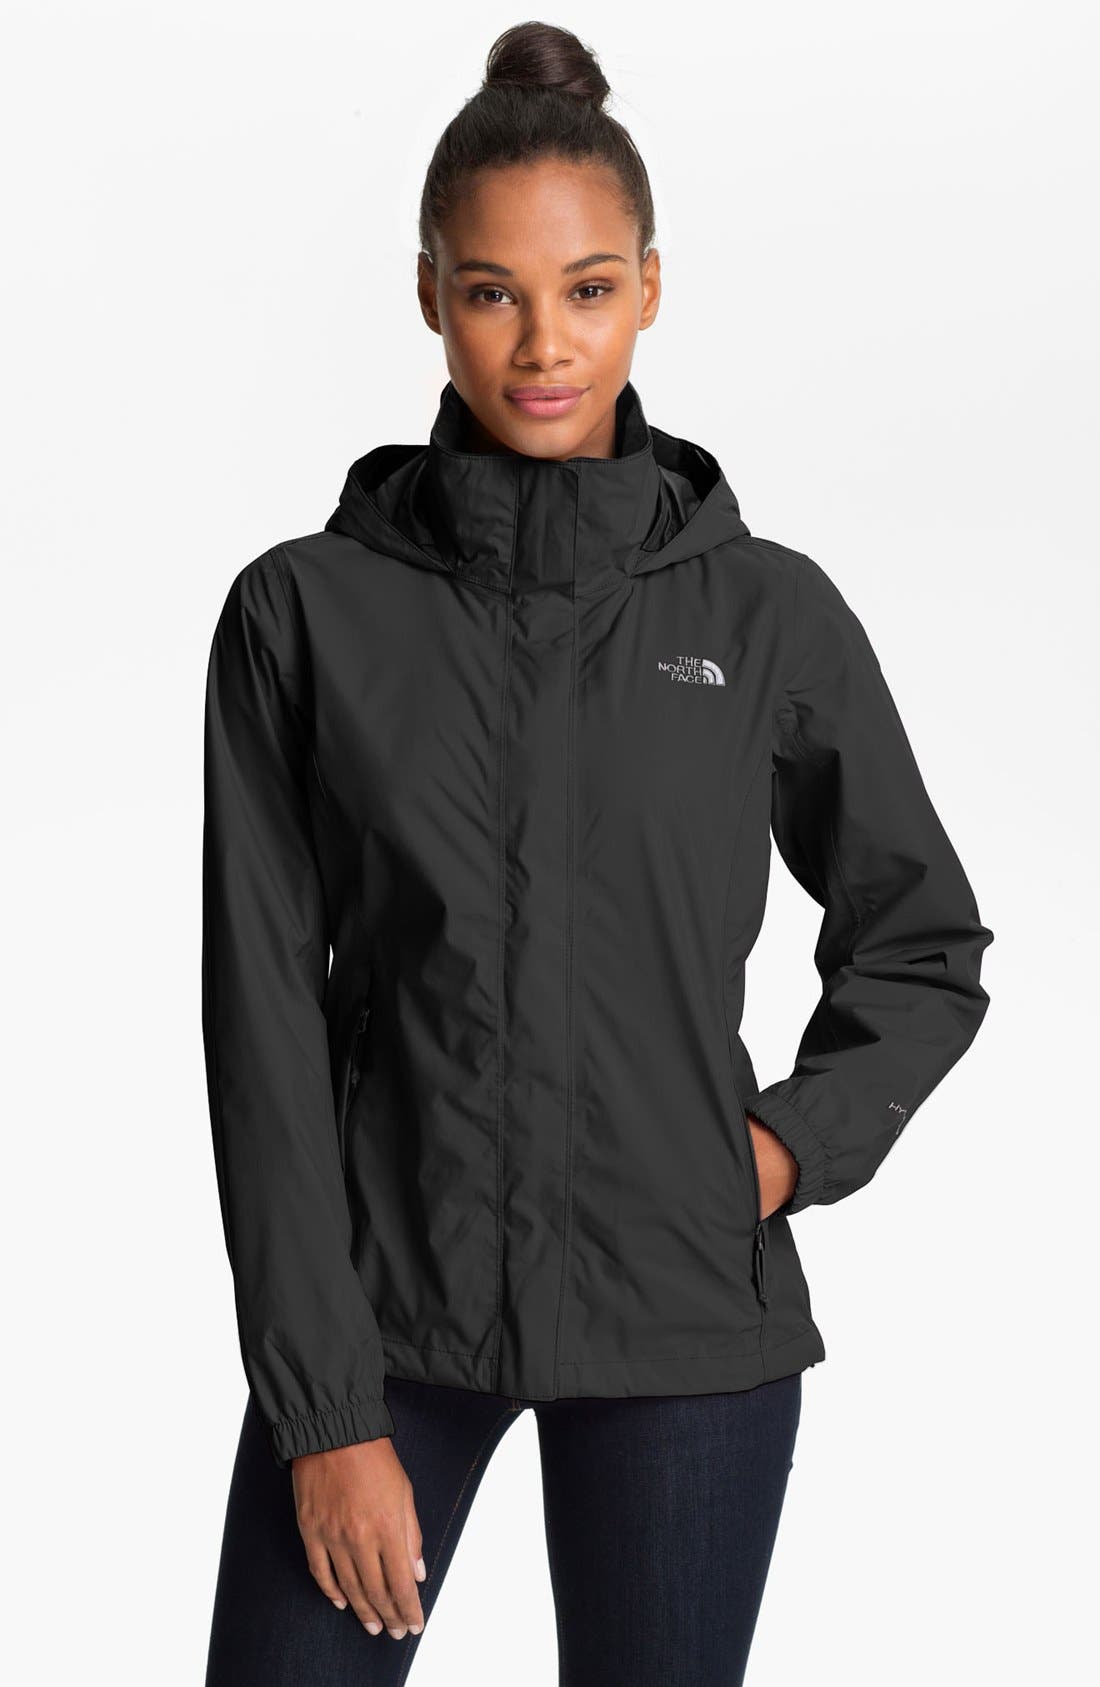 waterproof jacket the north face